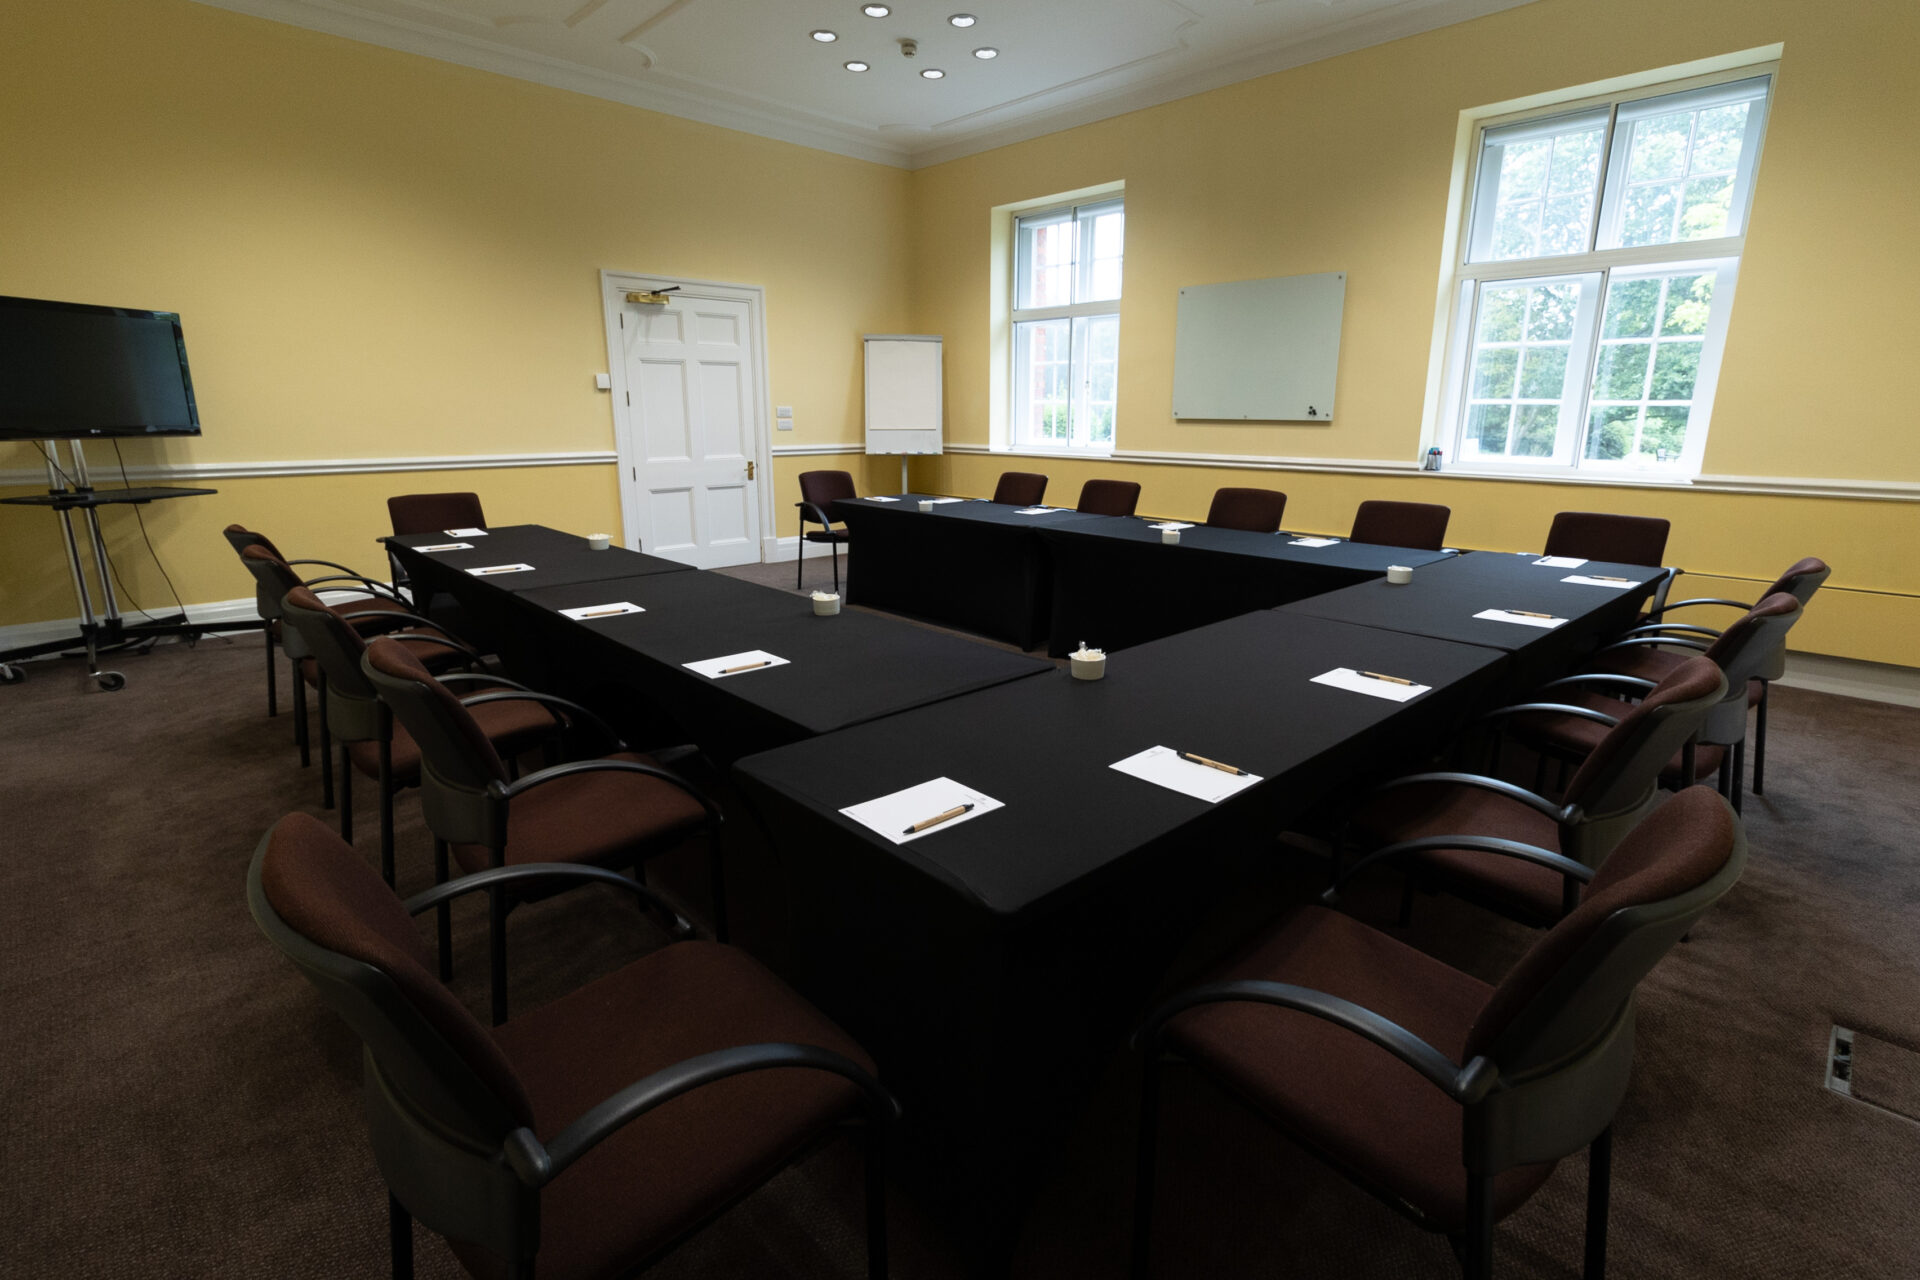 The Greening conference room, laid out in a U-shaped boardroom style to accommodate up to 16 people.